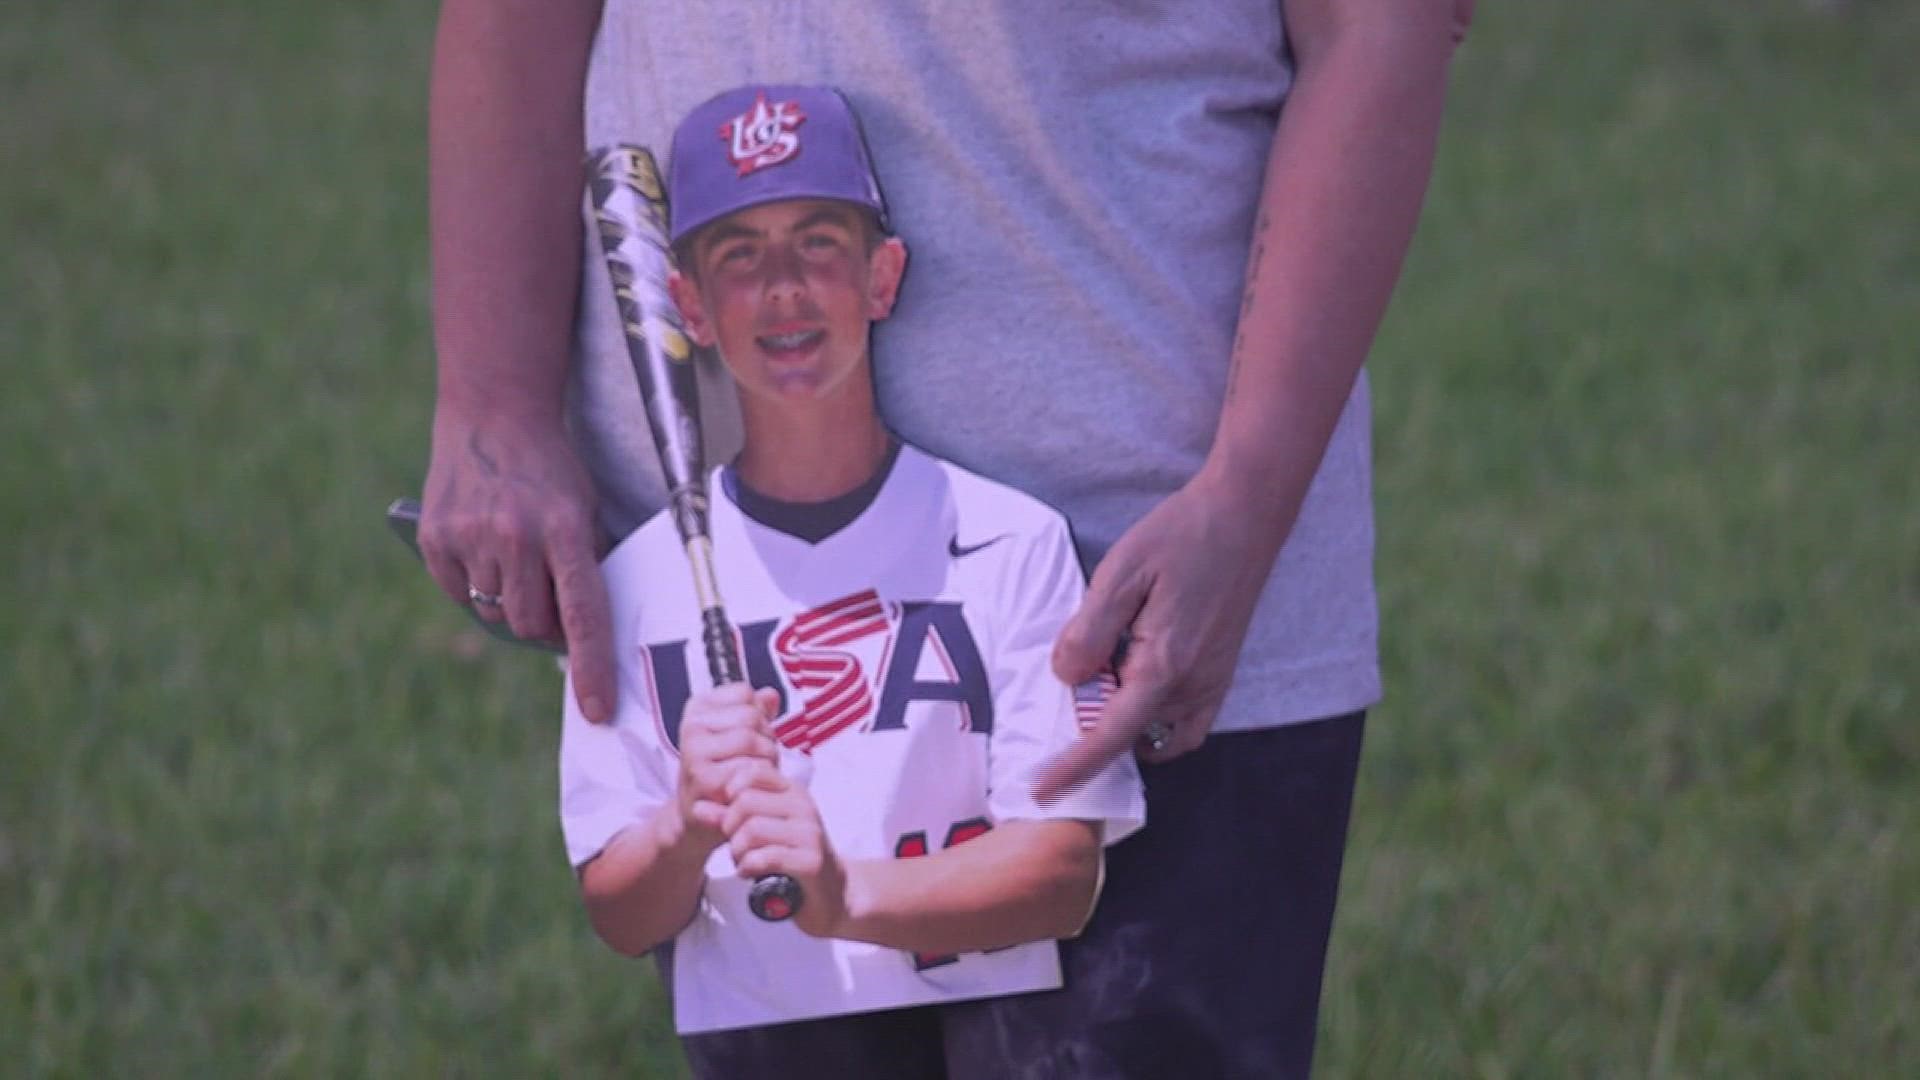 The 12-year-old competed in the WBSC U-12 World Cup in Taiwan, where he represented the U.S. and beat Venezuela 10-2 to take home gold.